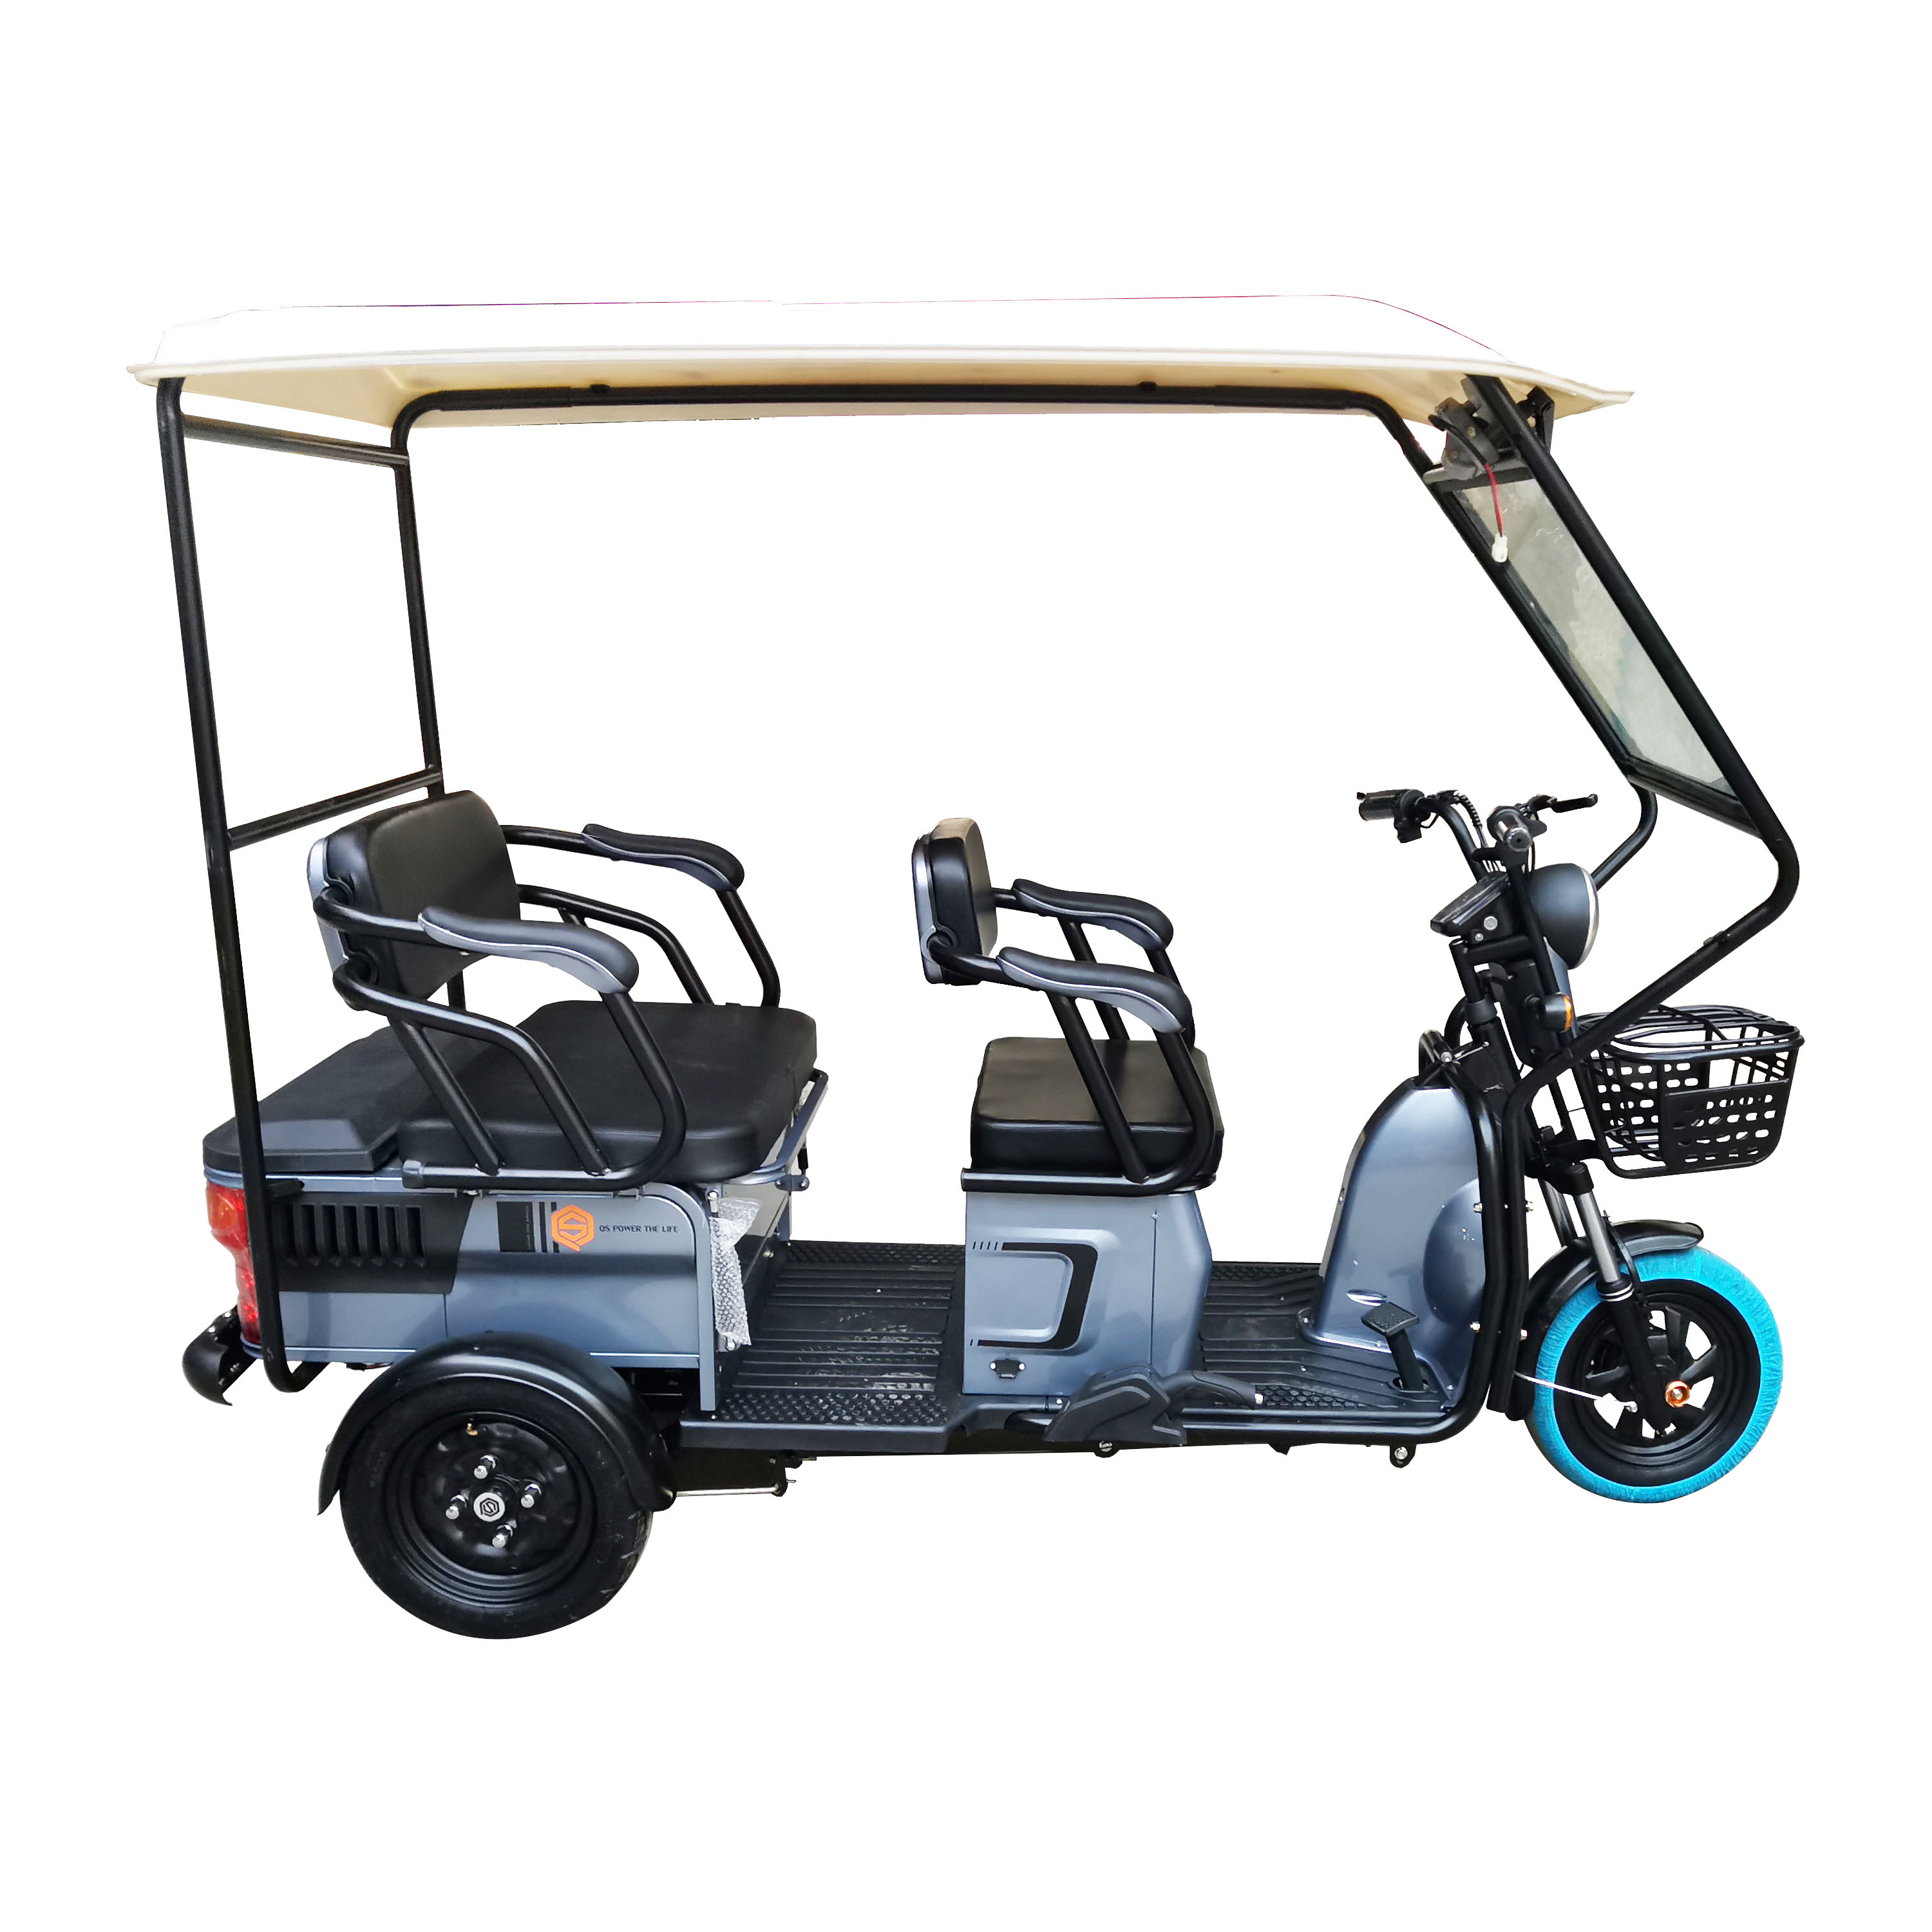 China Wholesale Bajaj Supplier Pricelist - 650 Watt Electric Trike Three-Wheelded Mobility Scooter With Seat for 3 People 3-Wheel 3 Passenger Scooter – Qiangsheng